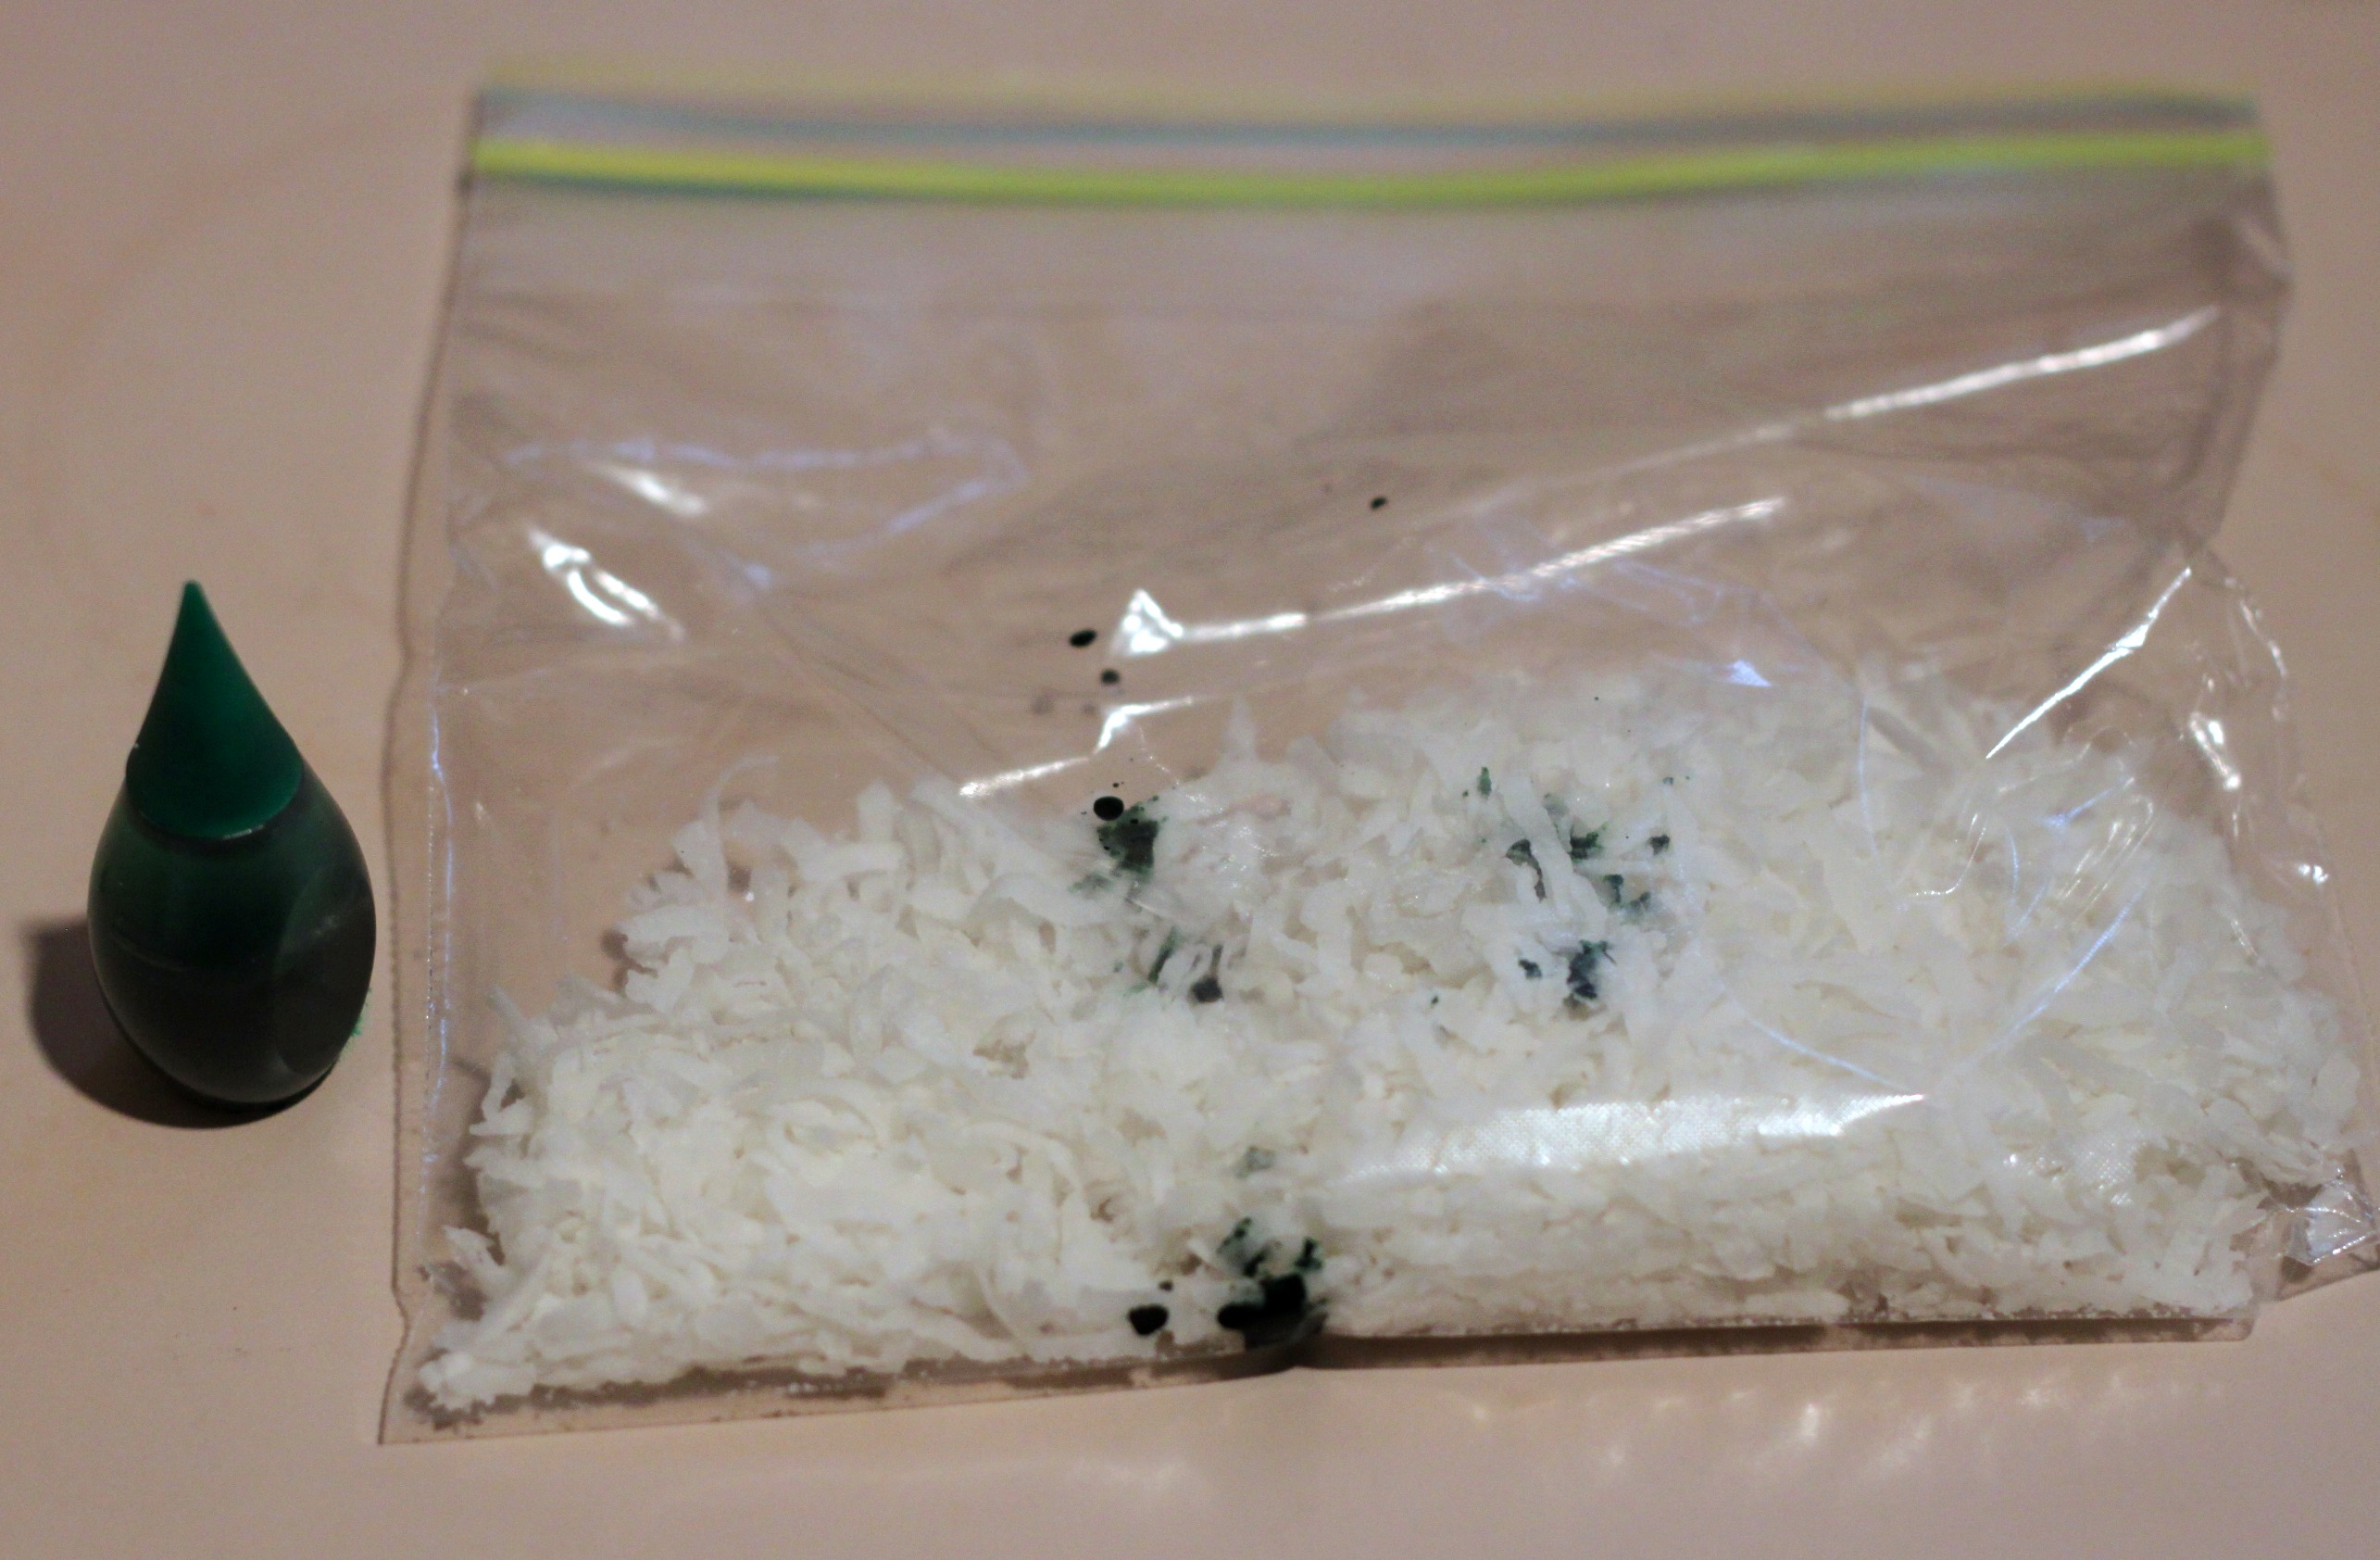 Green dye and coconut in bag